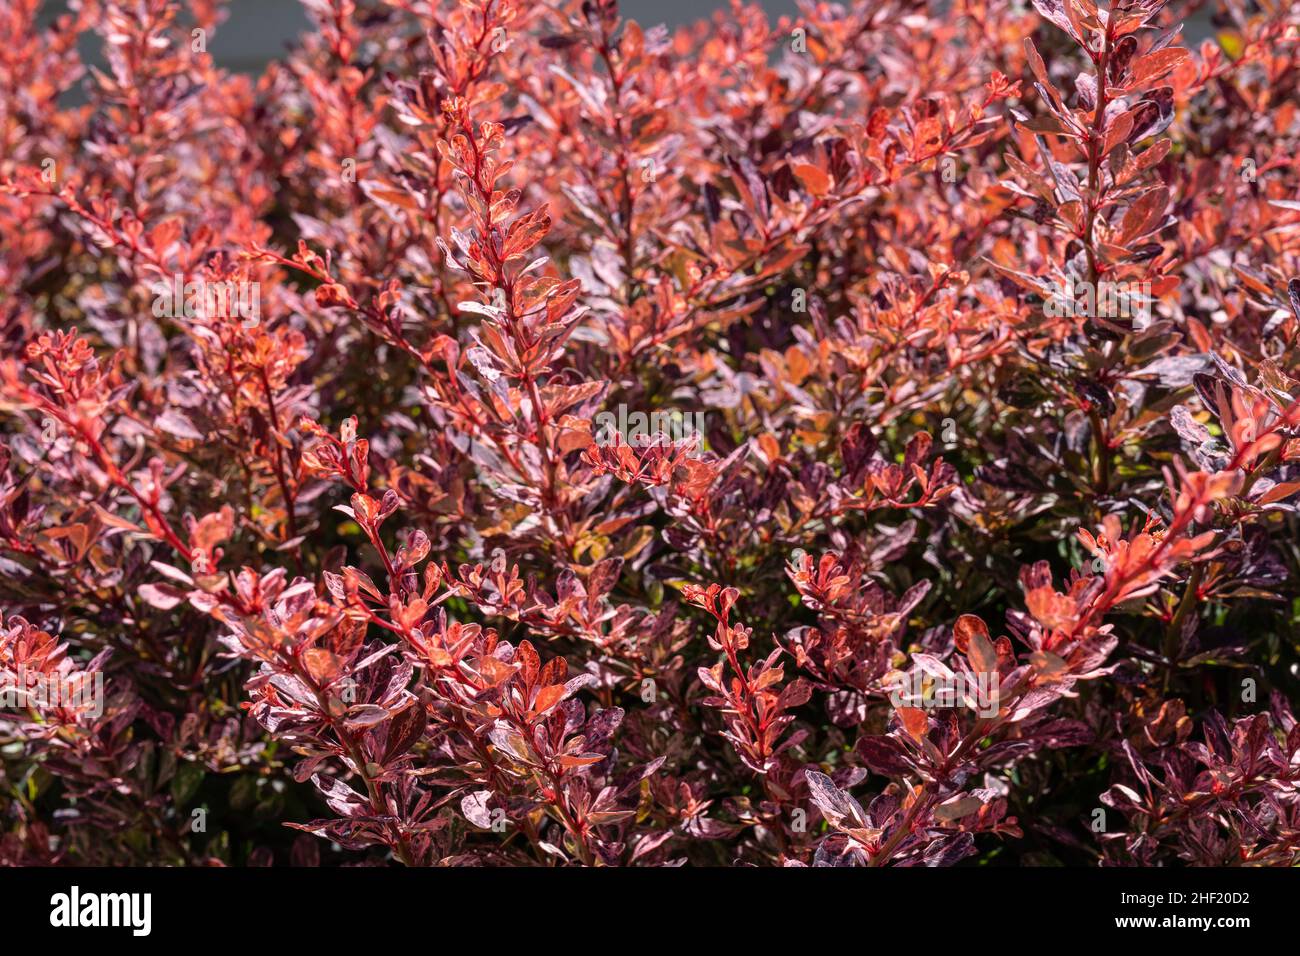 Japanese barberry (Berberis thunbergii) is a species of flowering plant in the barberry family Berberidaceae, native to Japan and eastern Asia, though Stock Photo